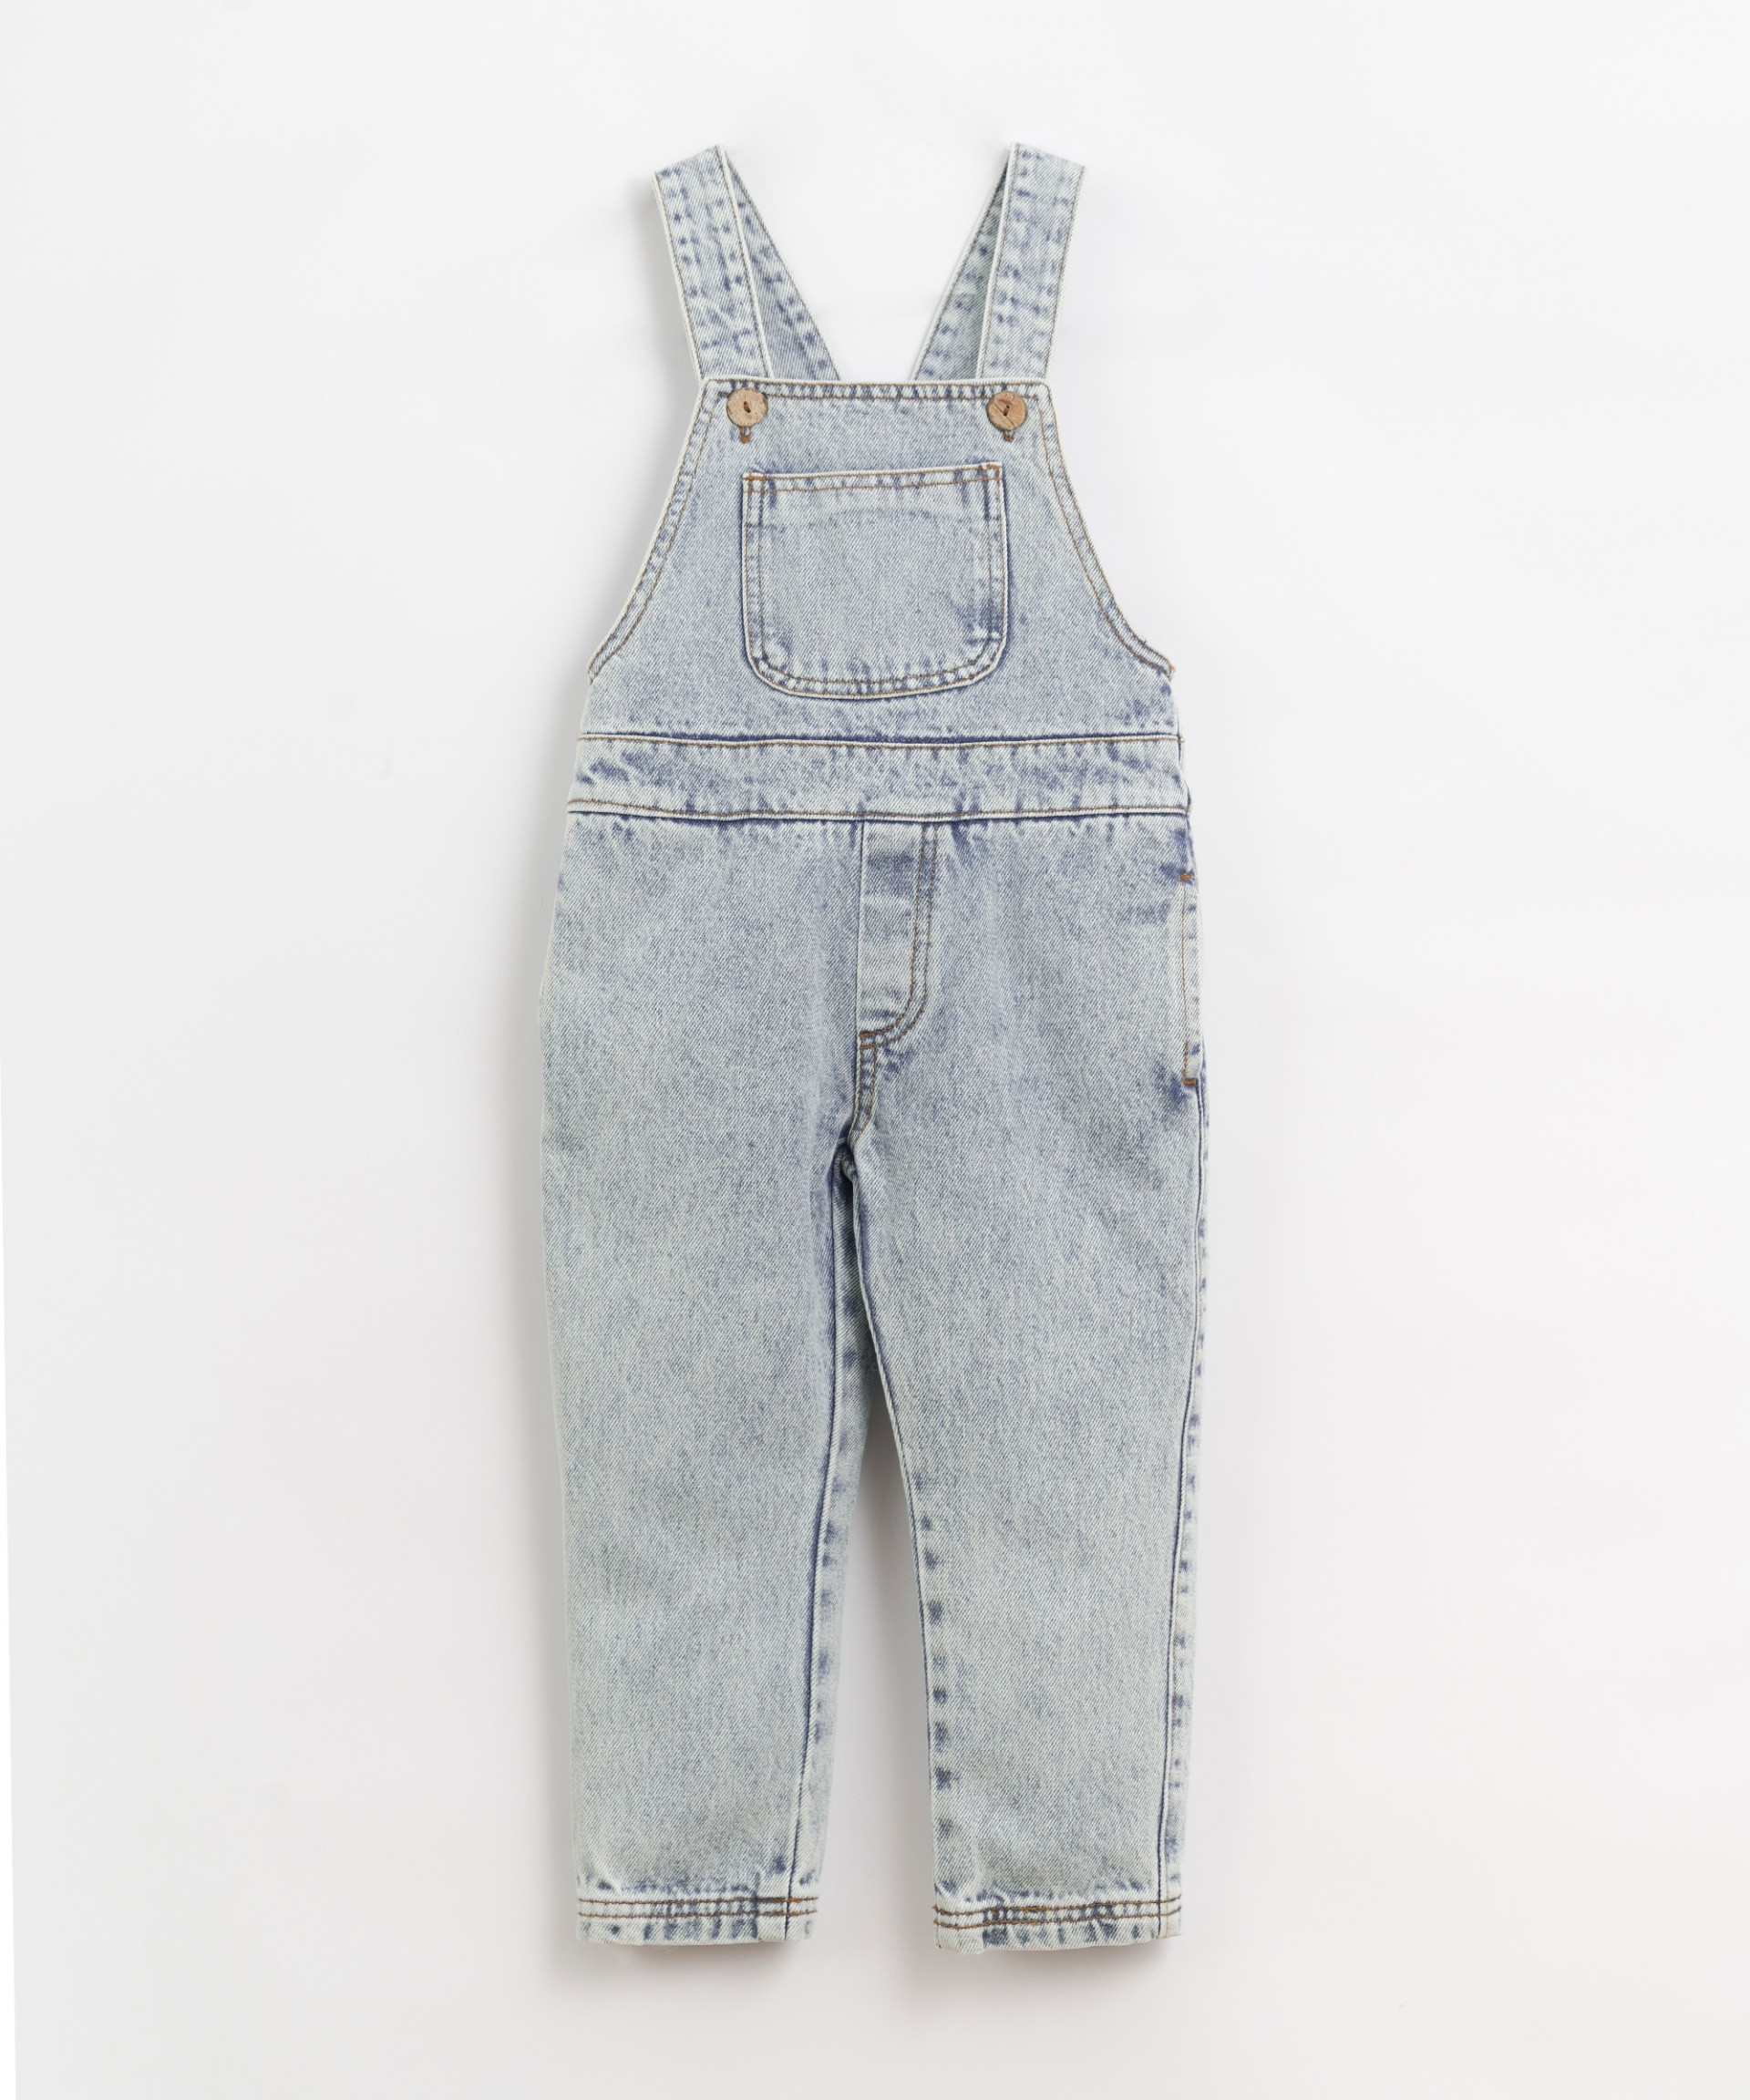 Denim dungarees with pockets | Organic Care